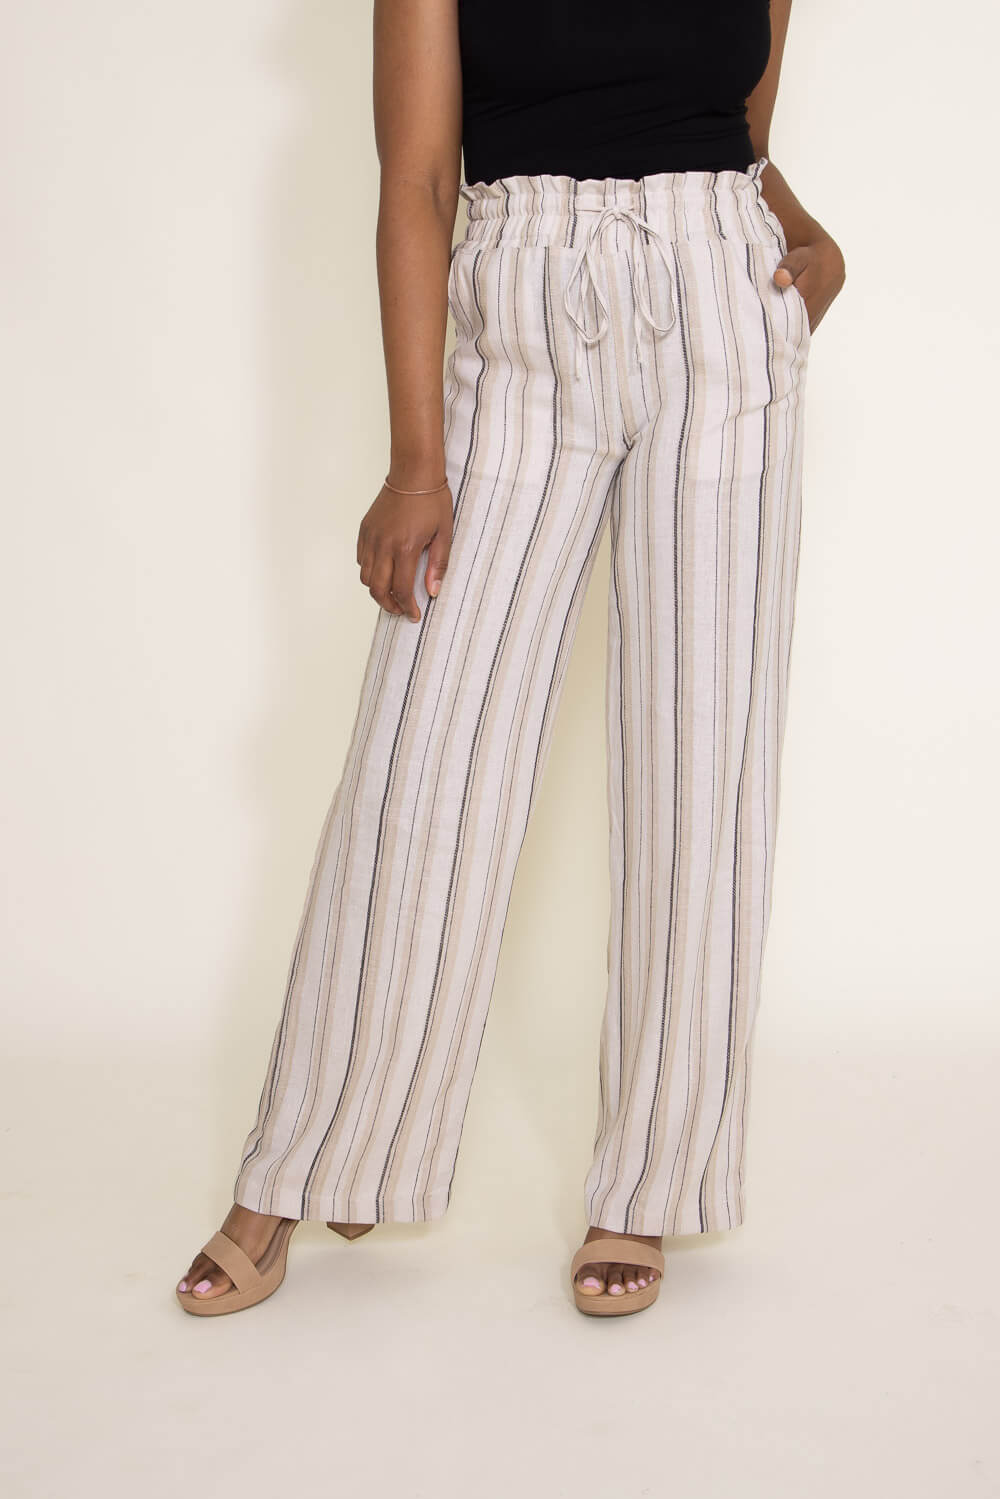 The Diya White Pinstripe Casual Trousers. Head online and shop this  season's range of trousers at PrettyLi… | Pinstripe pants outfit, Clothes,  Girls fashion clothes